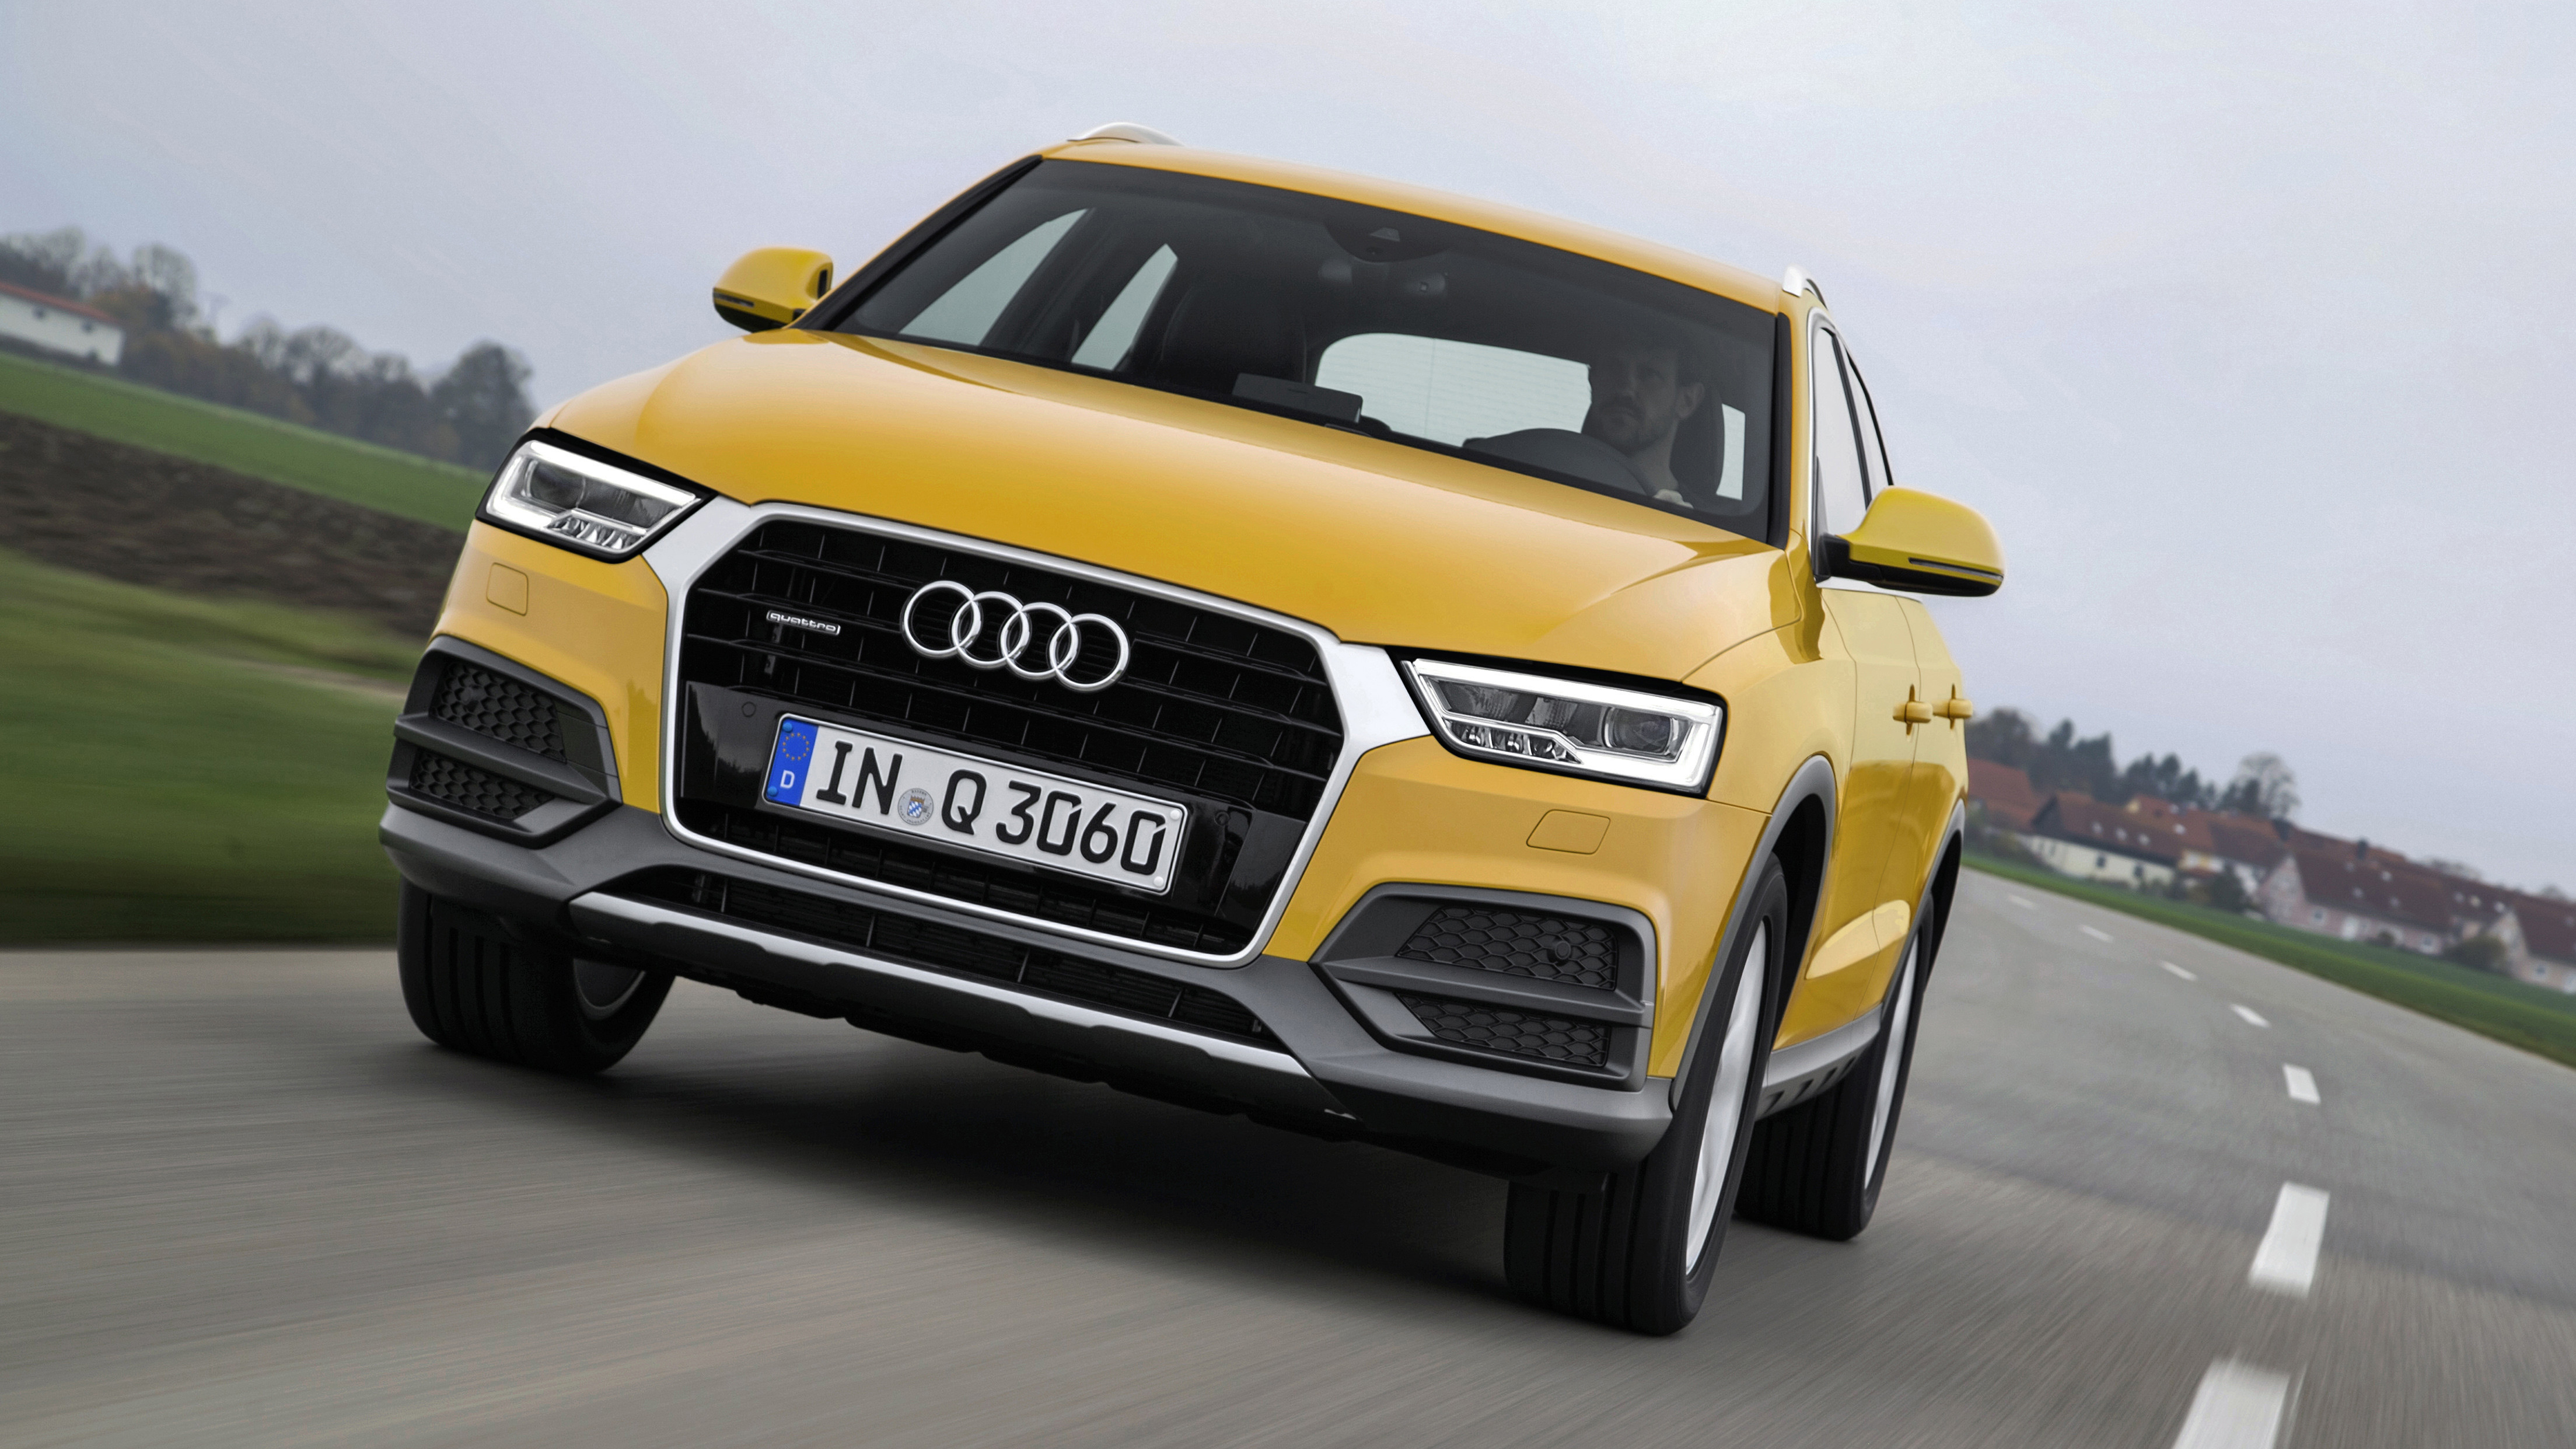 Audi Q3 modern specifications